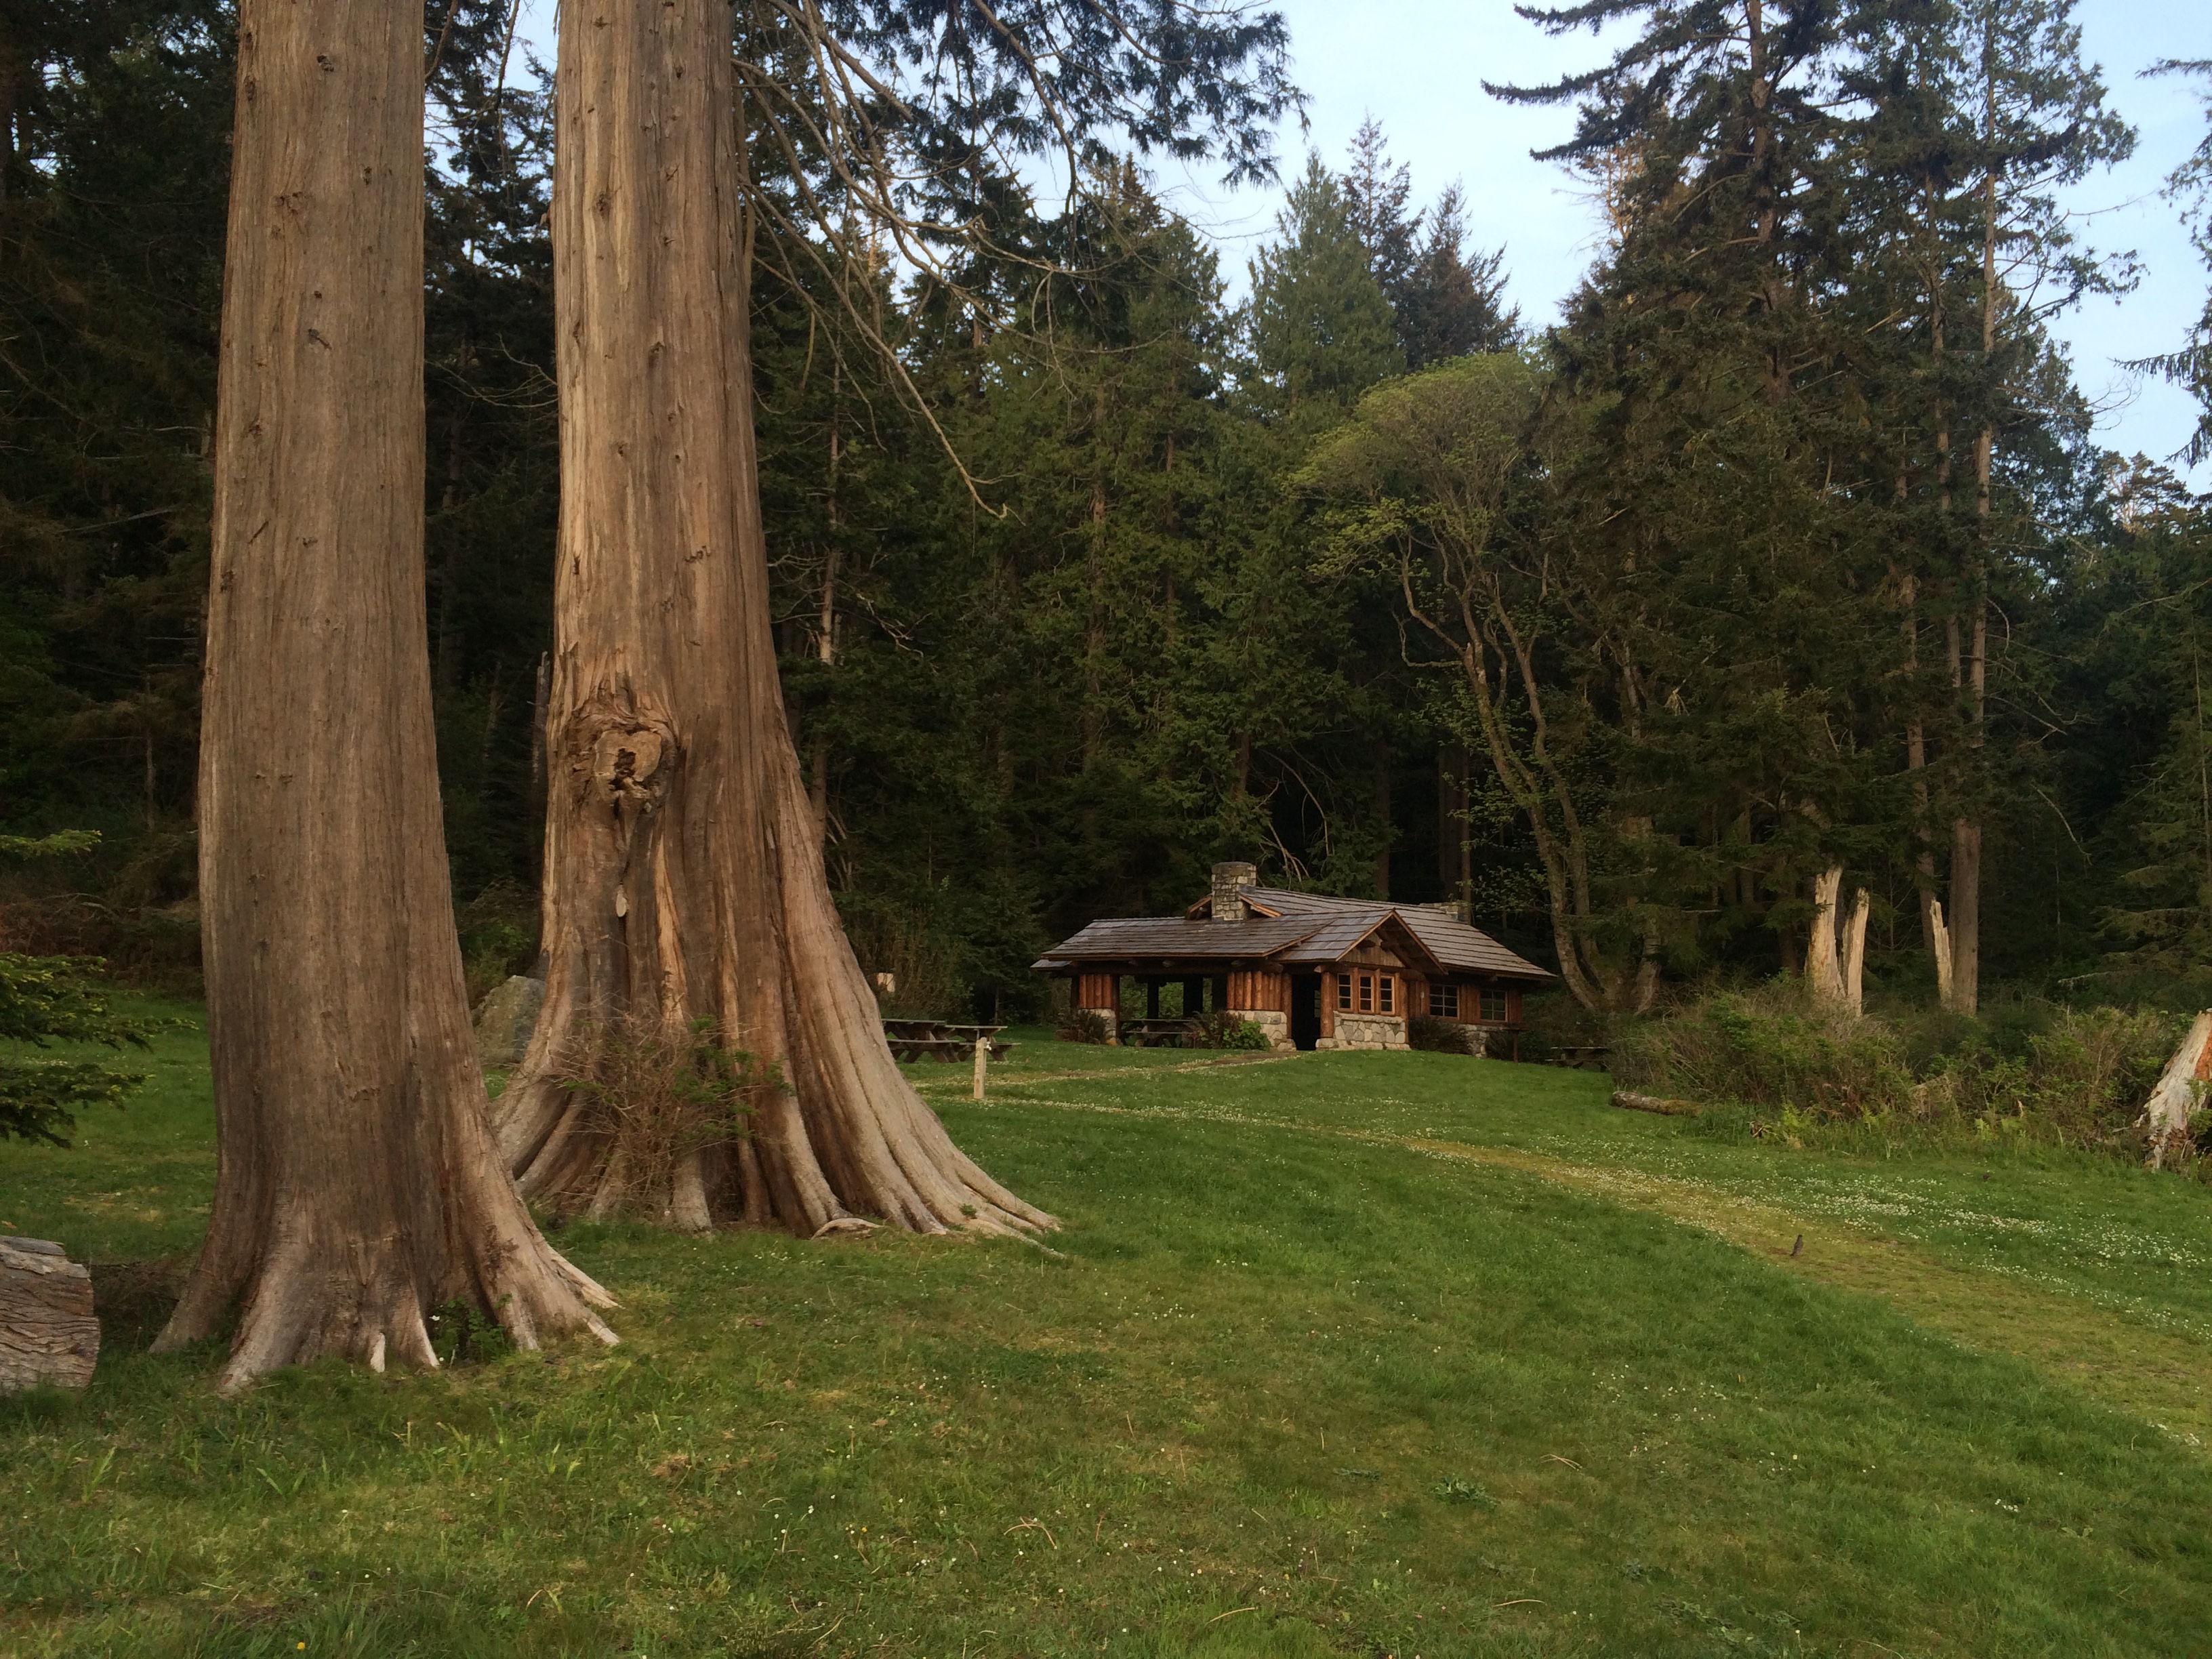 Old growth trees and a rustic cabin